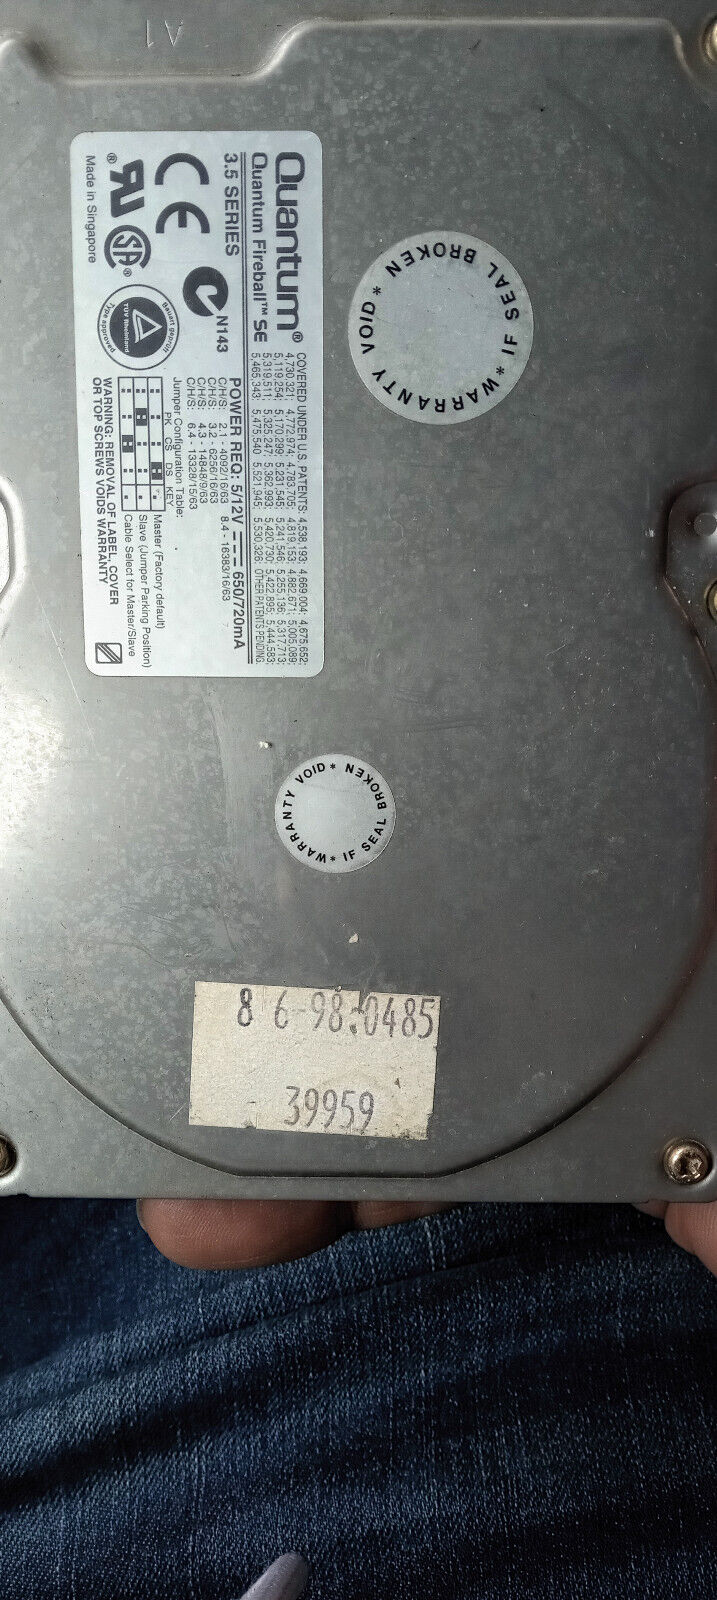 Quantum Fireball SE 3.5 Series 4.3GB SE43A013 HDD Hard Disk Drive Tested Working